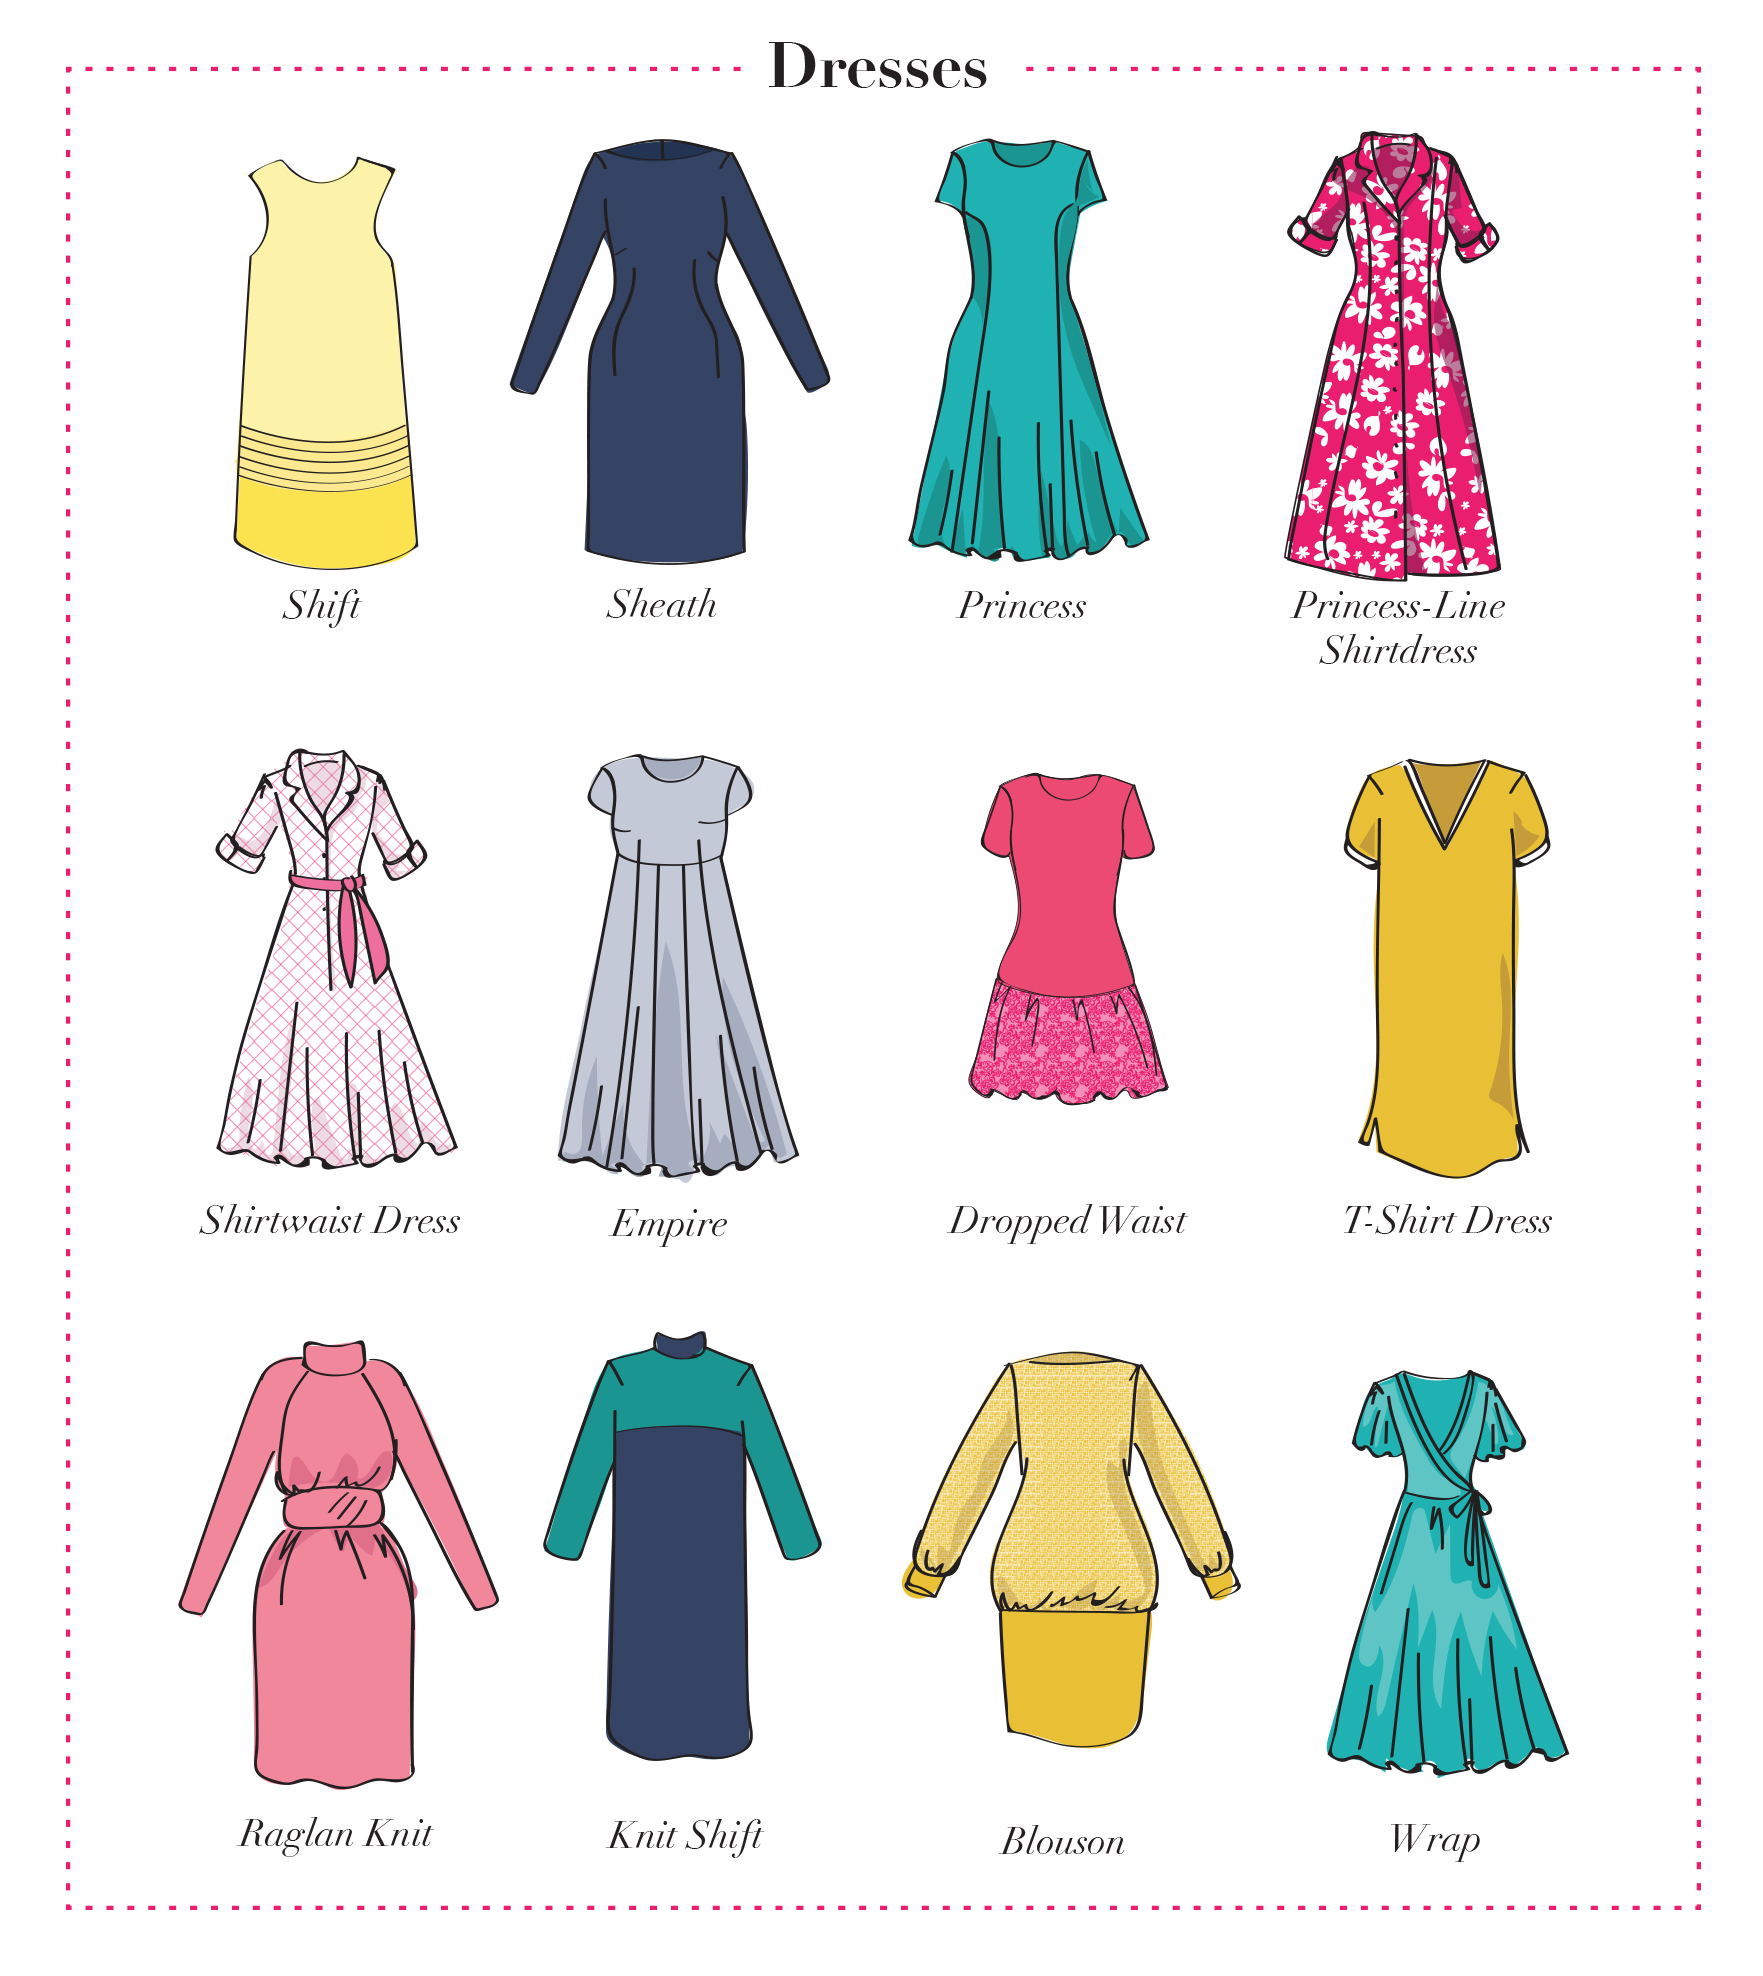 The Guide to Easy Dressing - Dresses and Pants - Image Intelligence